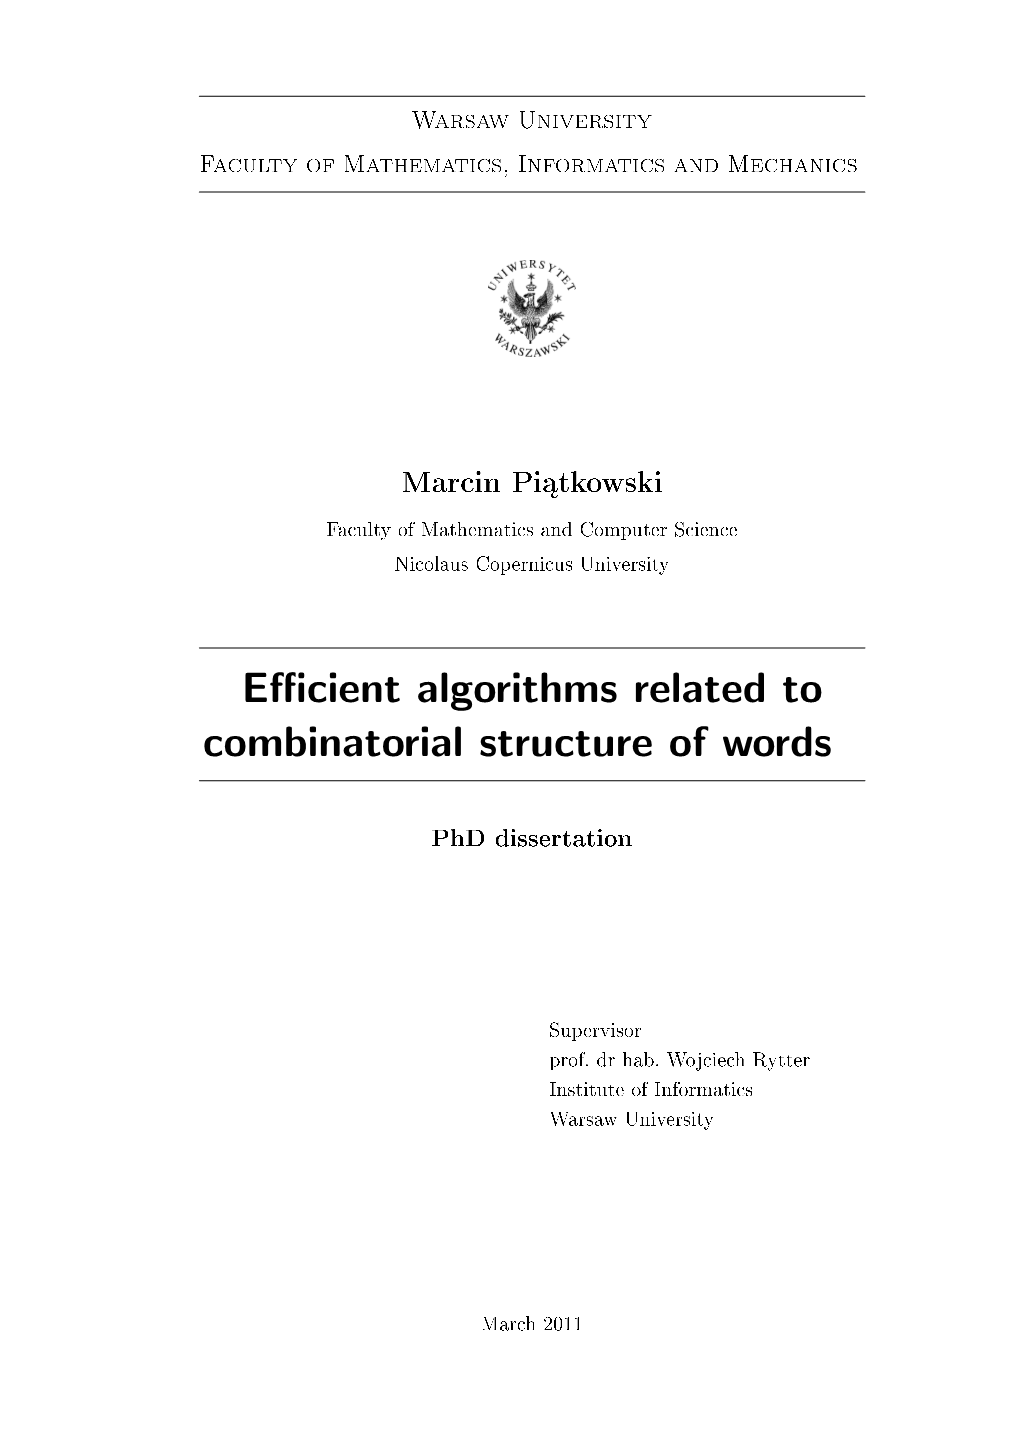 Efficient Algorithms Related to Combinatorial Structure of Words